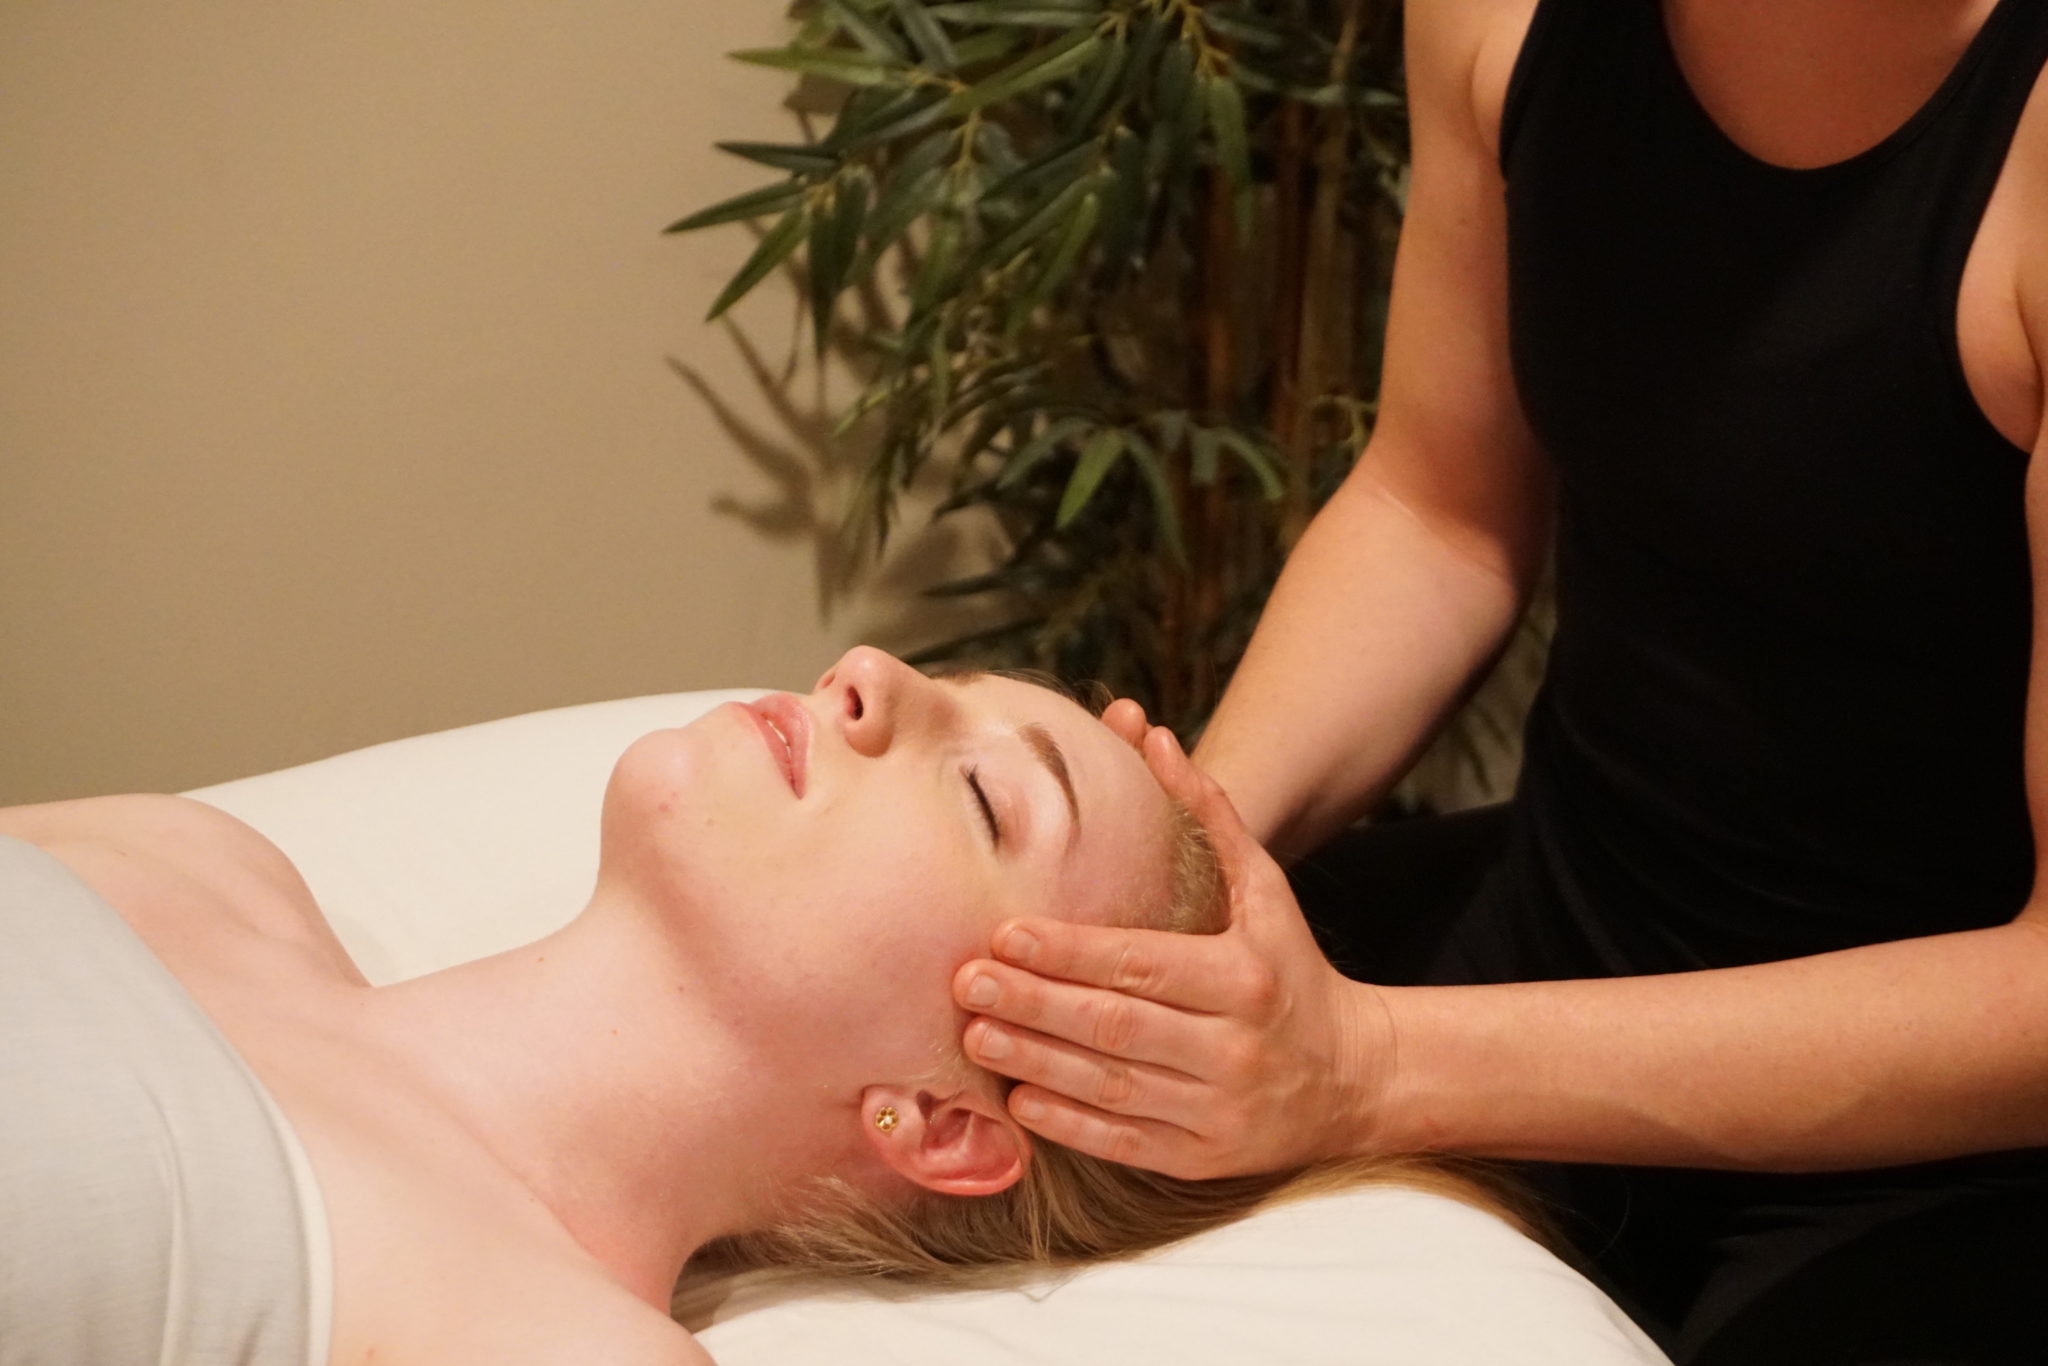 $118 For 60-Minute Couples' Massage With One Elevation Add-On Per